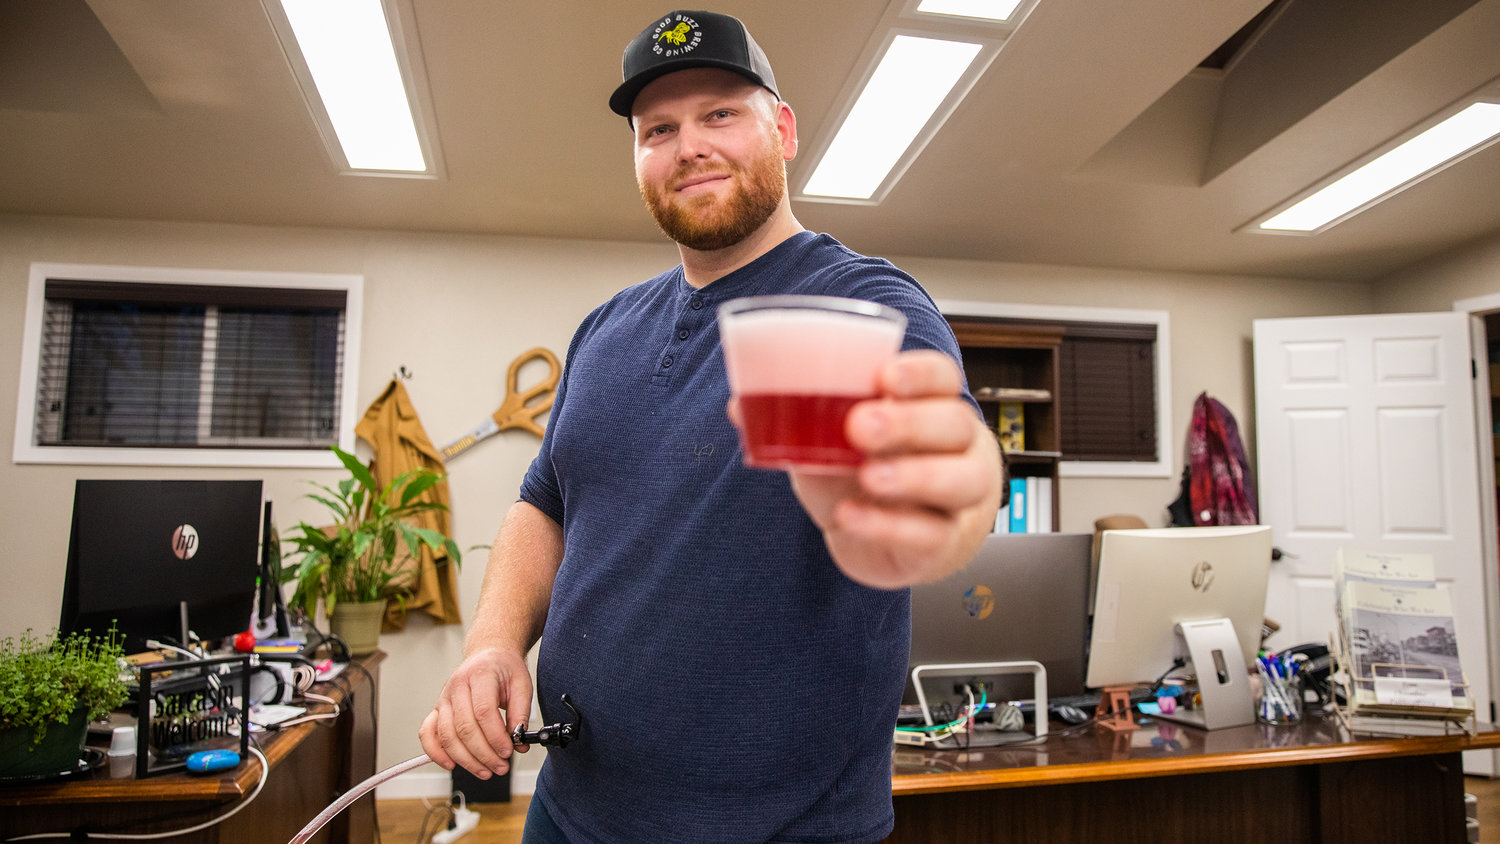 Forrest Chesvick, owner of Good Buzz Brewing Company, smiles and serves up drinks during a Business After Hours event at the Centralia-Chehalis Chamber of Commerce building.